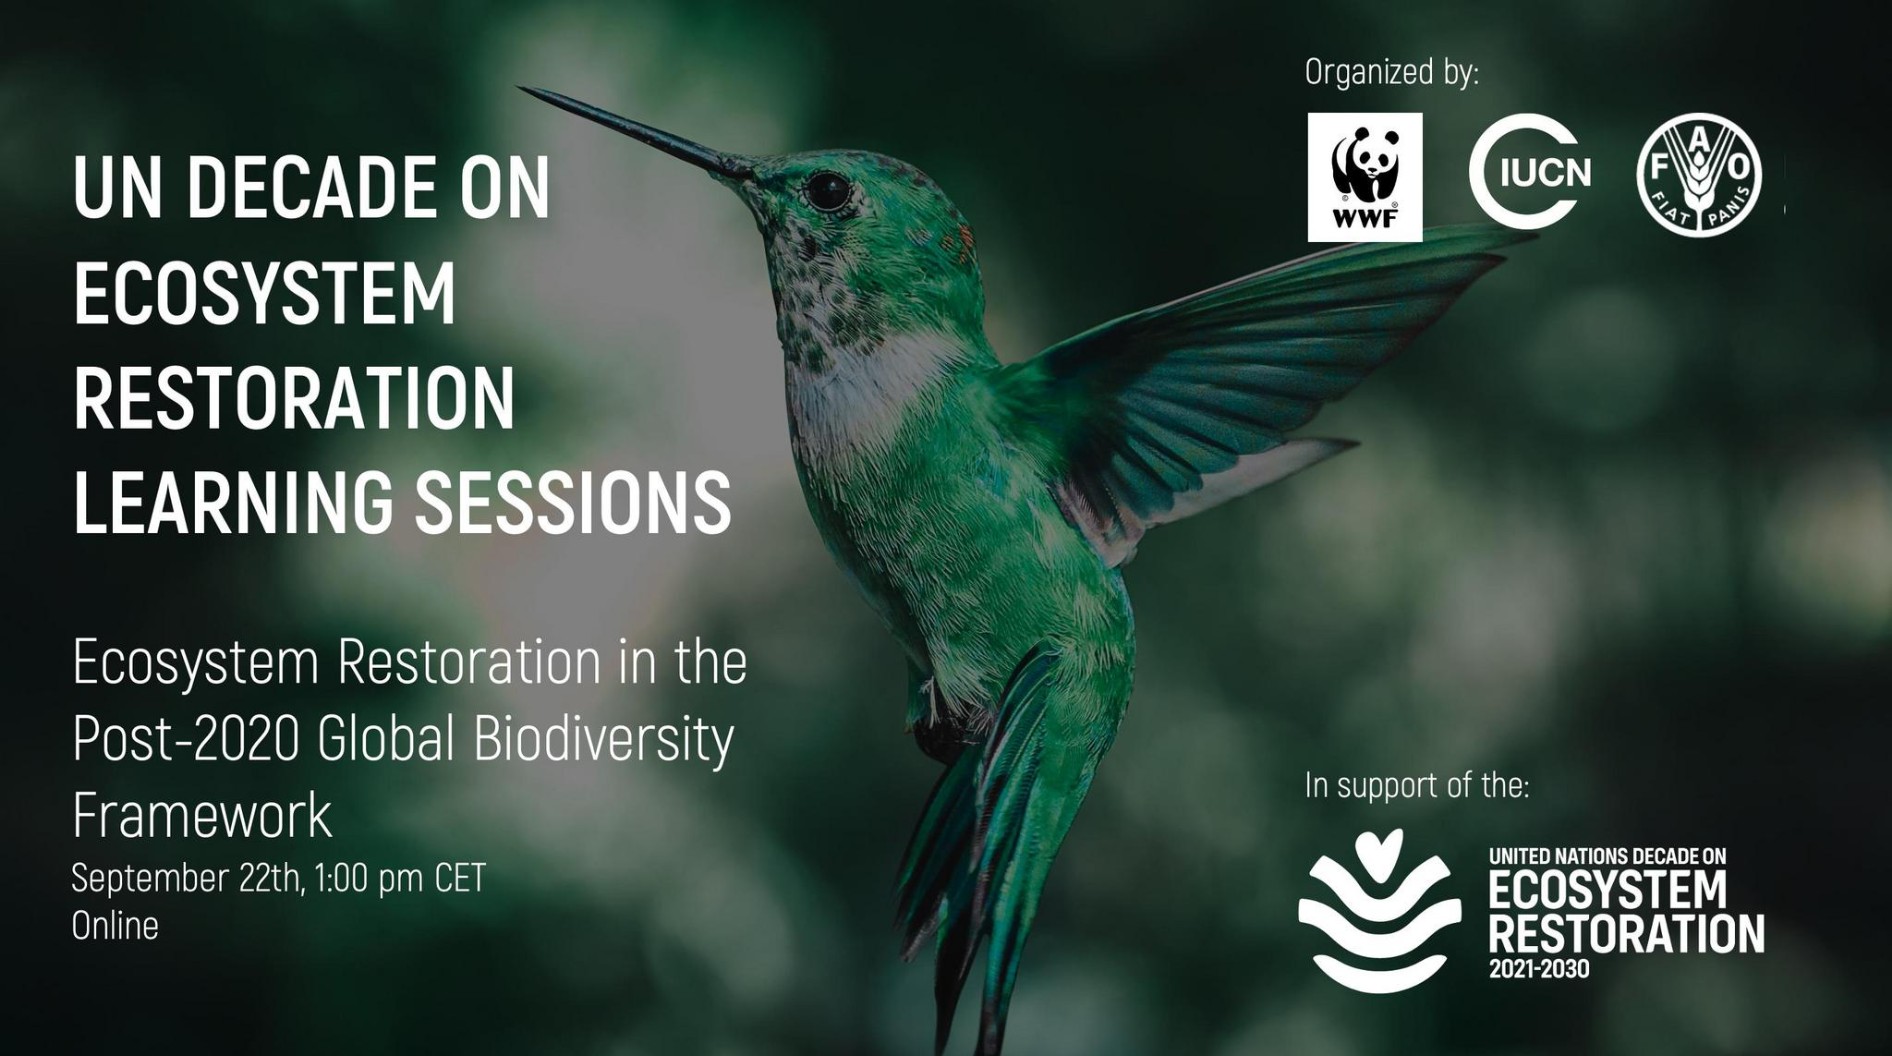 UN Decade Learning Sessions: Ecosystem Restoration in the Post-2020 Global Biodiversity Framework